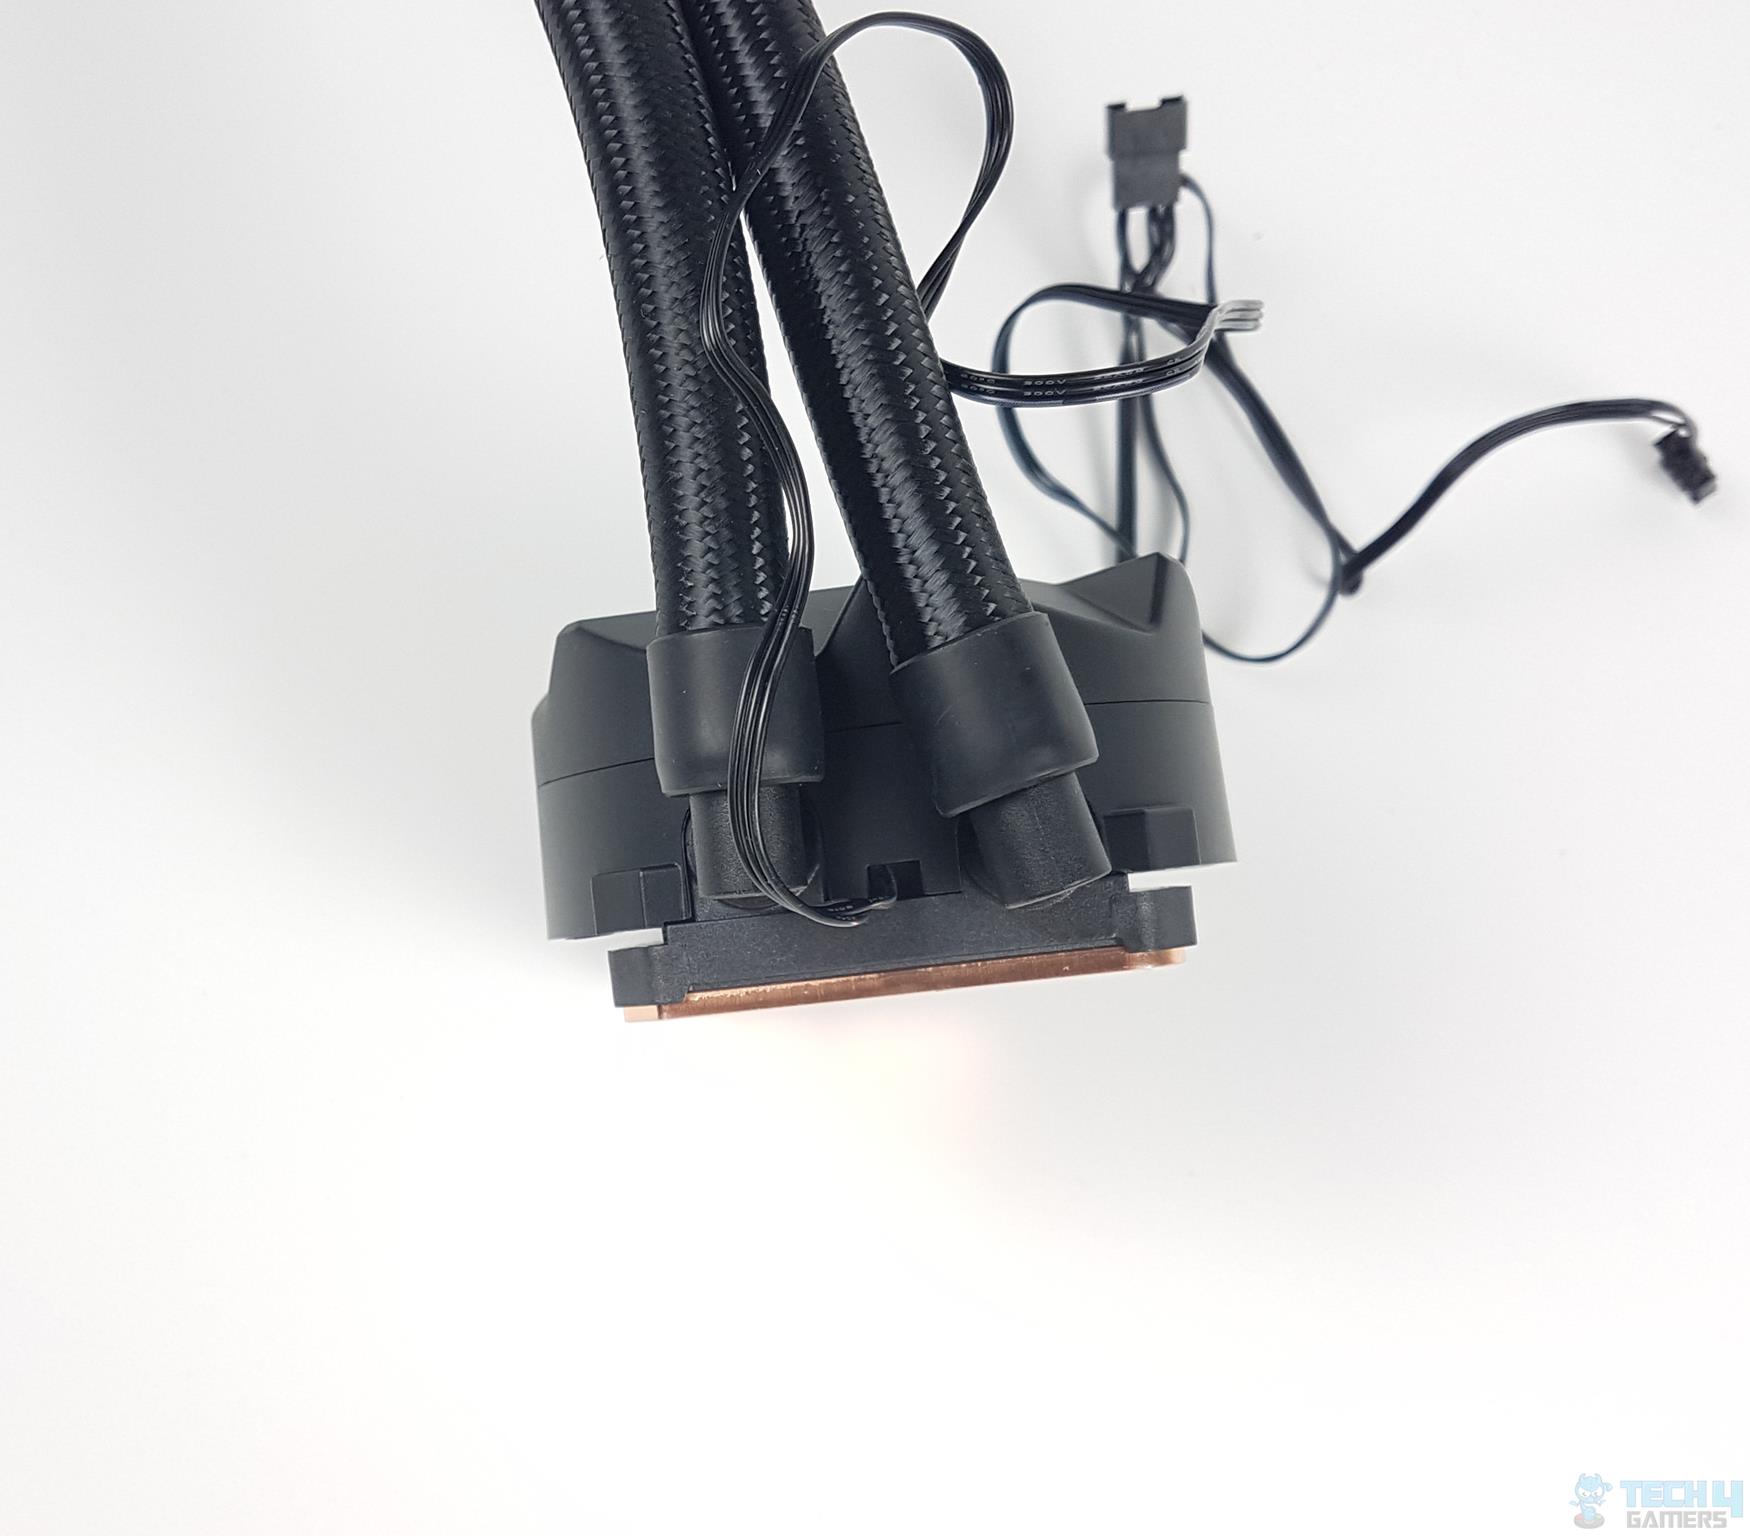 Silverstone SST-VD240-SLIM CPU Liquid Cooler —Tubes connection to the housing